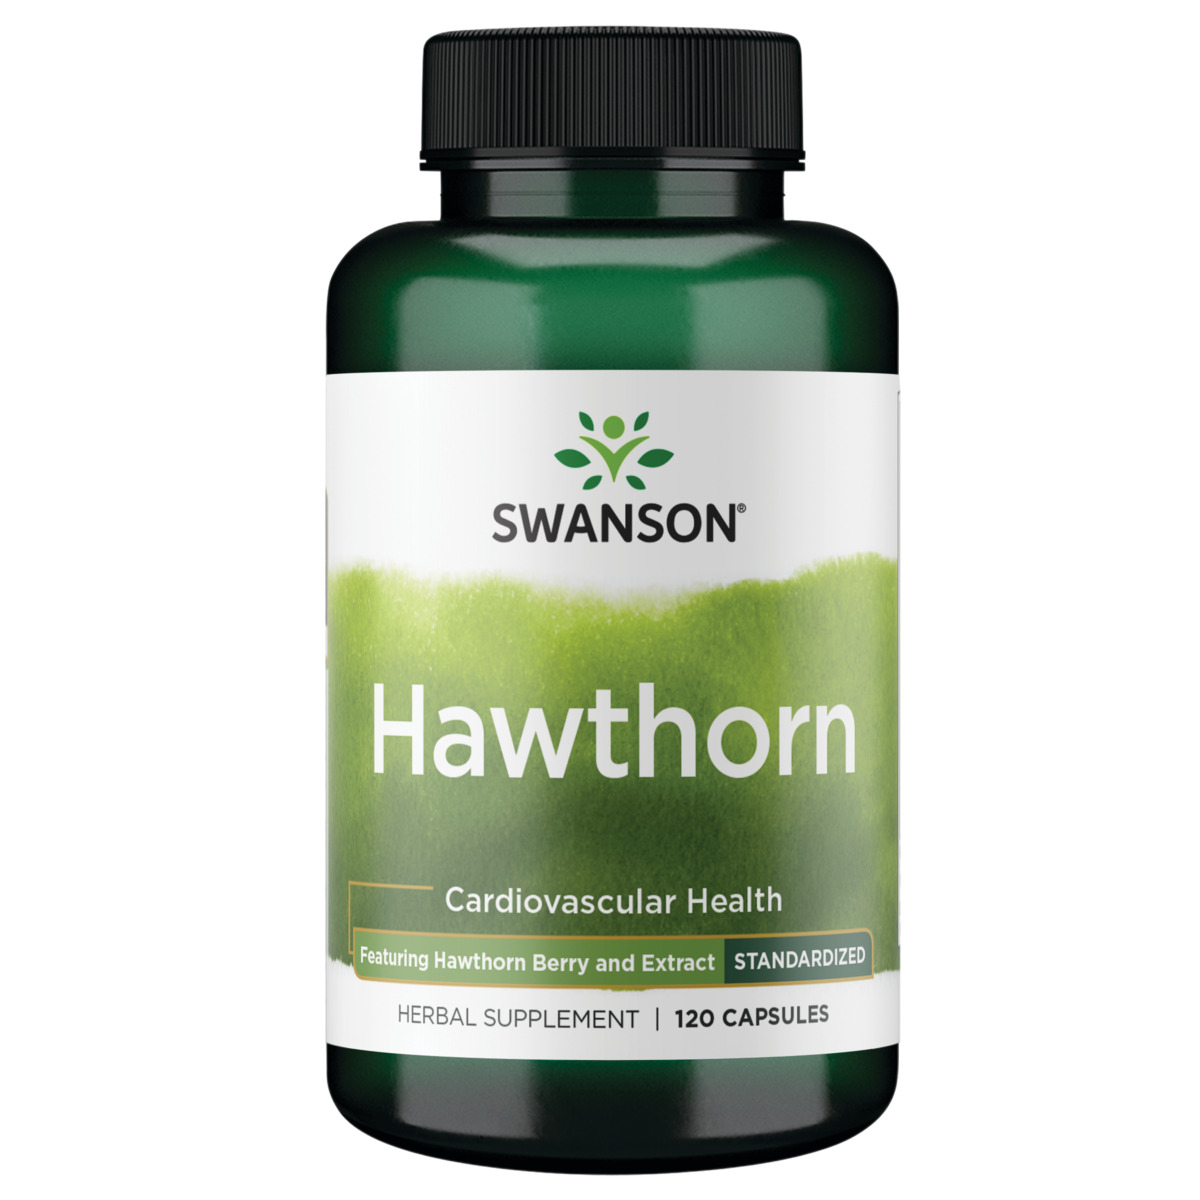 Swanson Hawthorn - Featuring Hawthorn Berry and Extract 120 Capsules